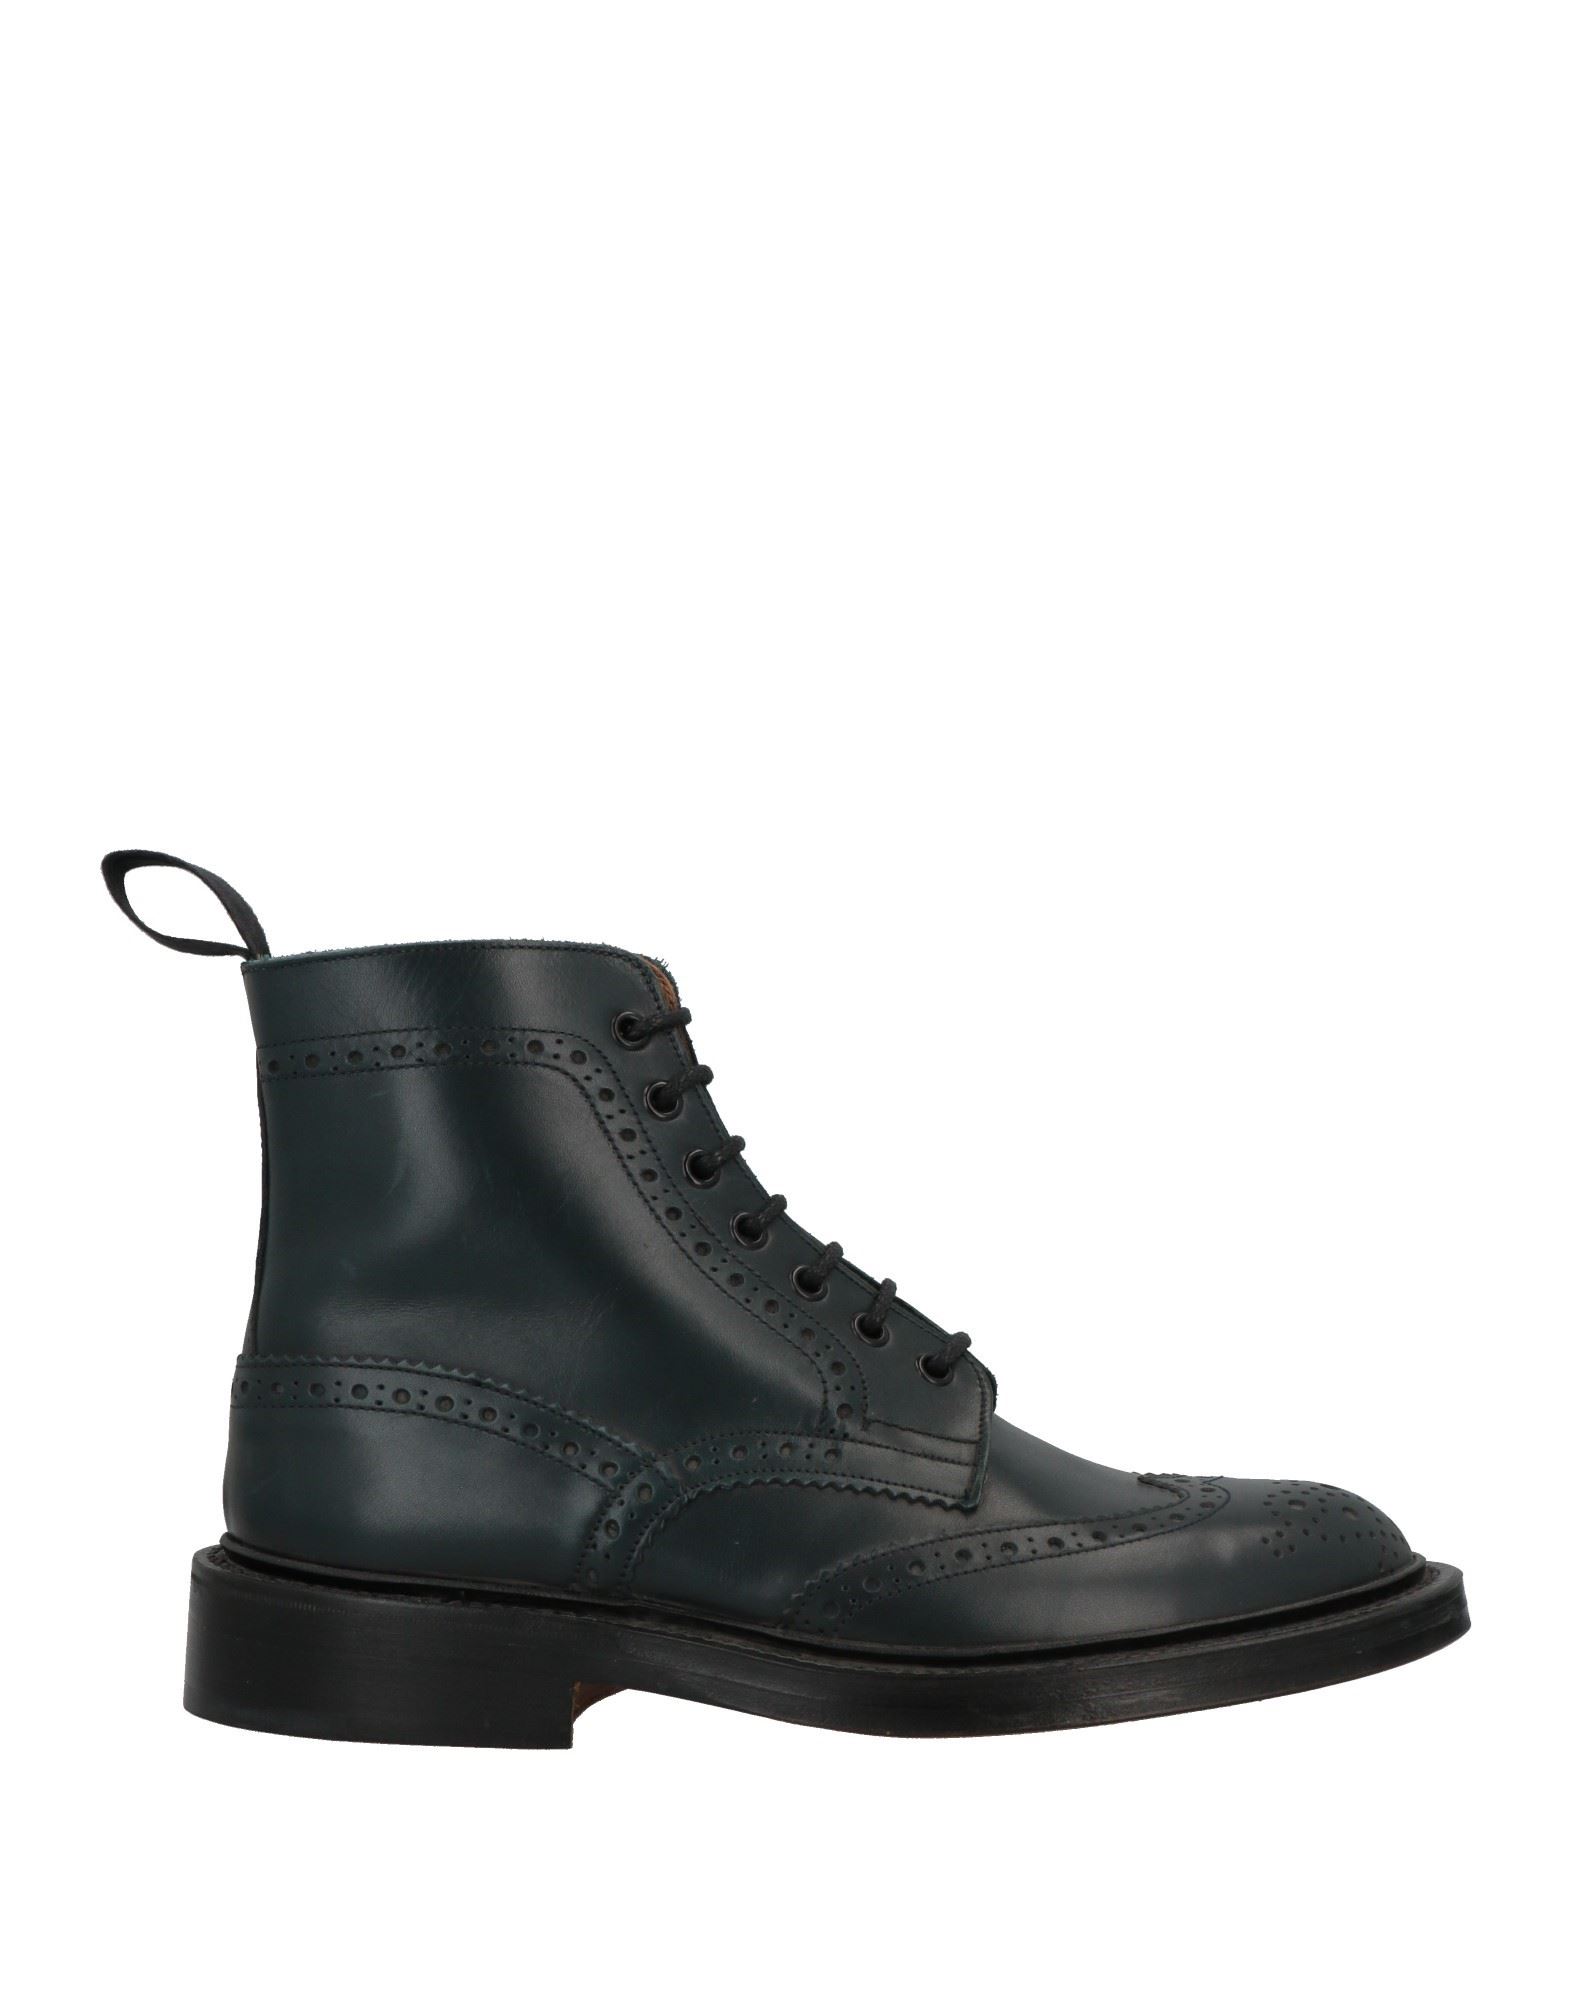 TRICKER'S ANKLE BOOTS